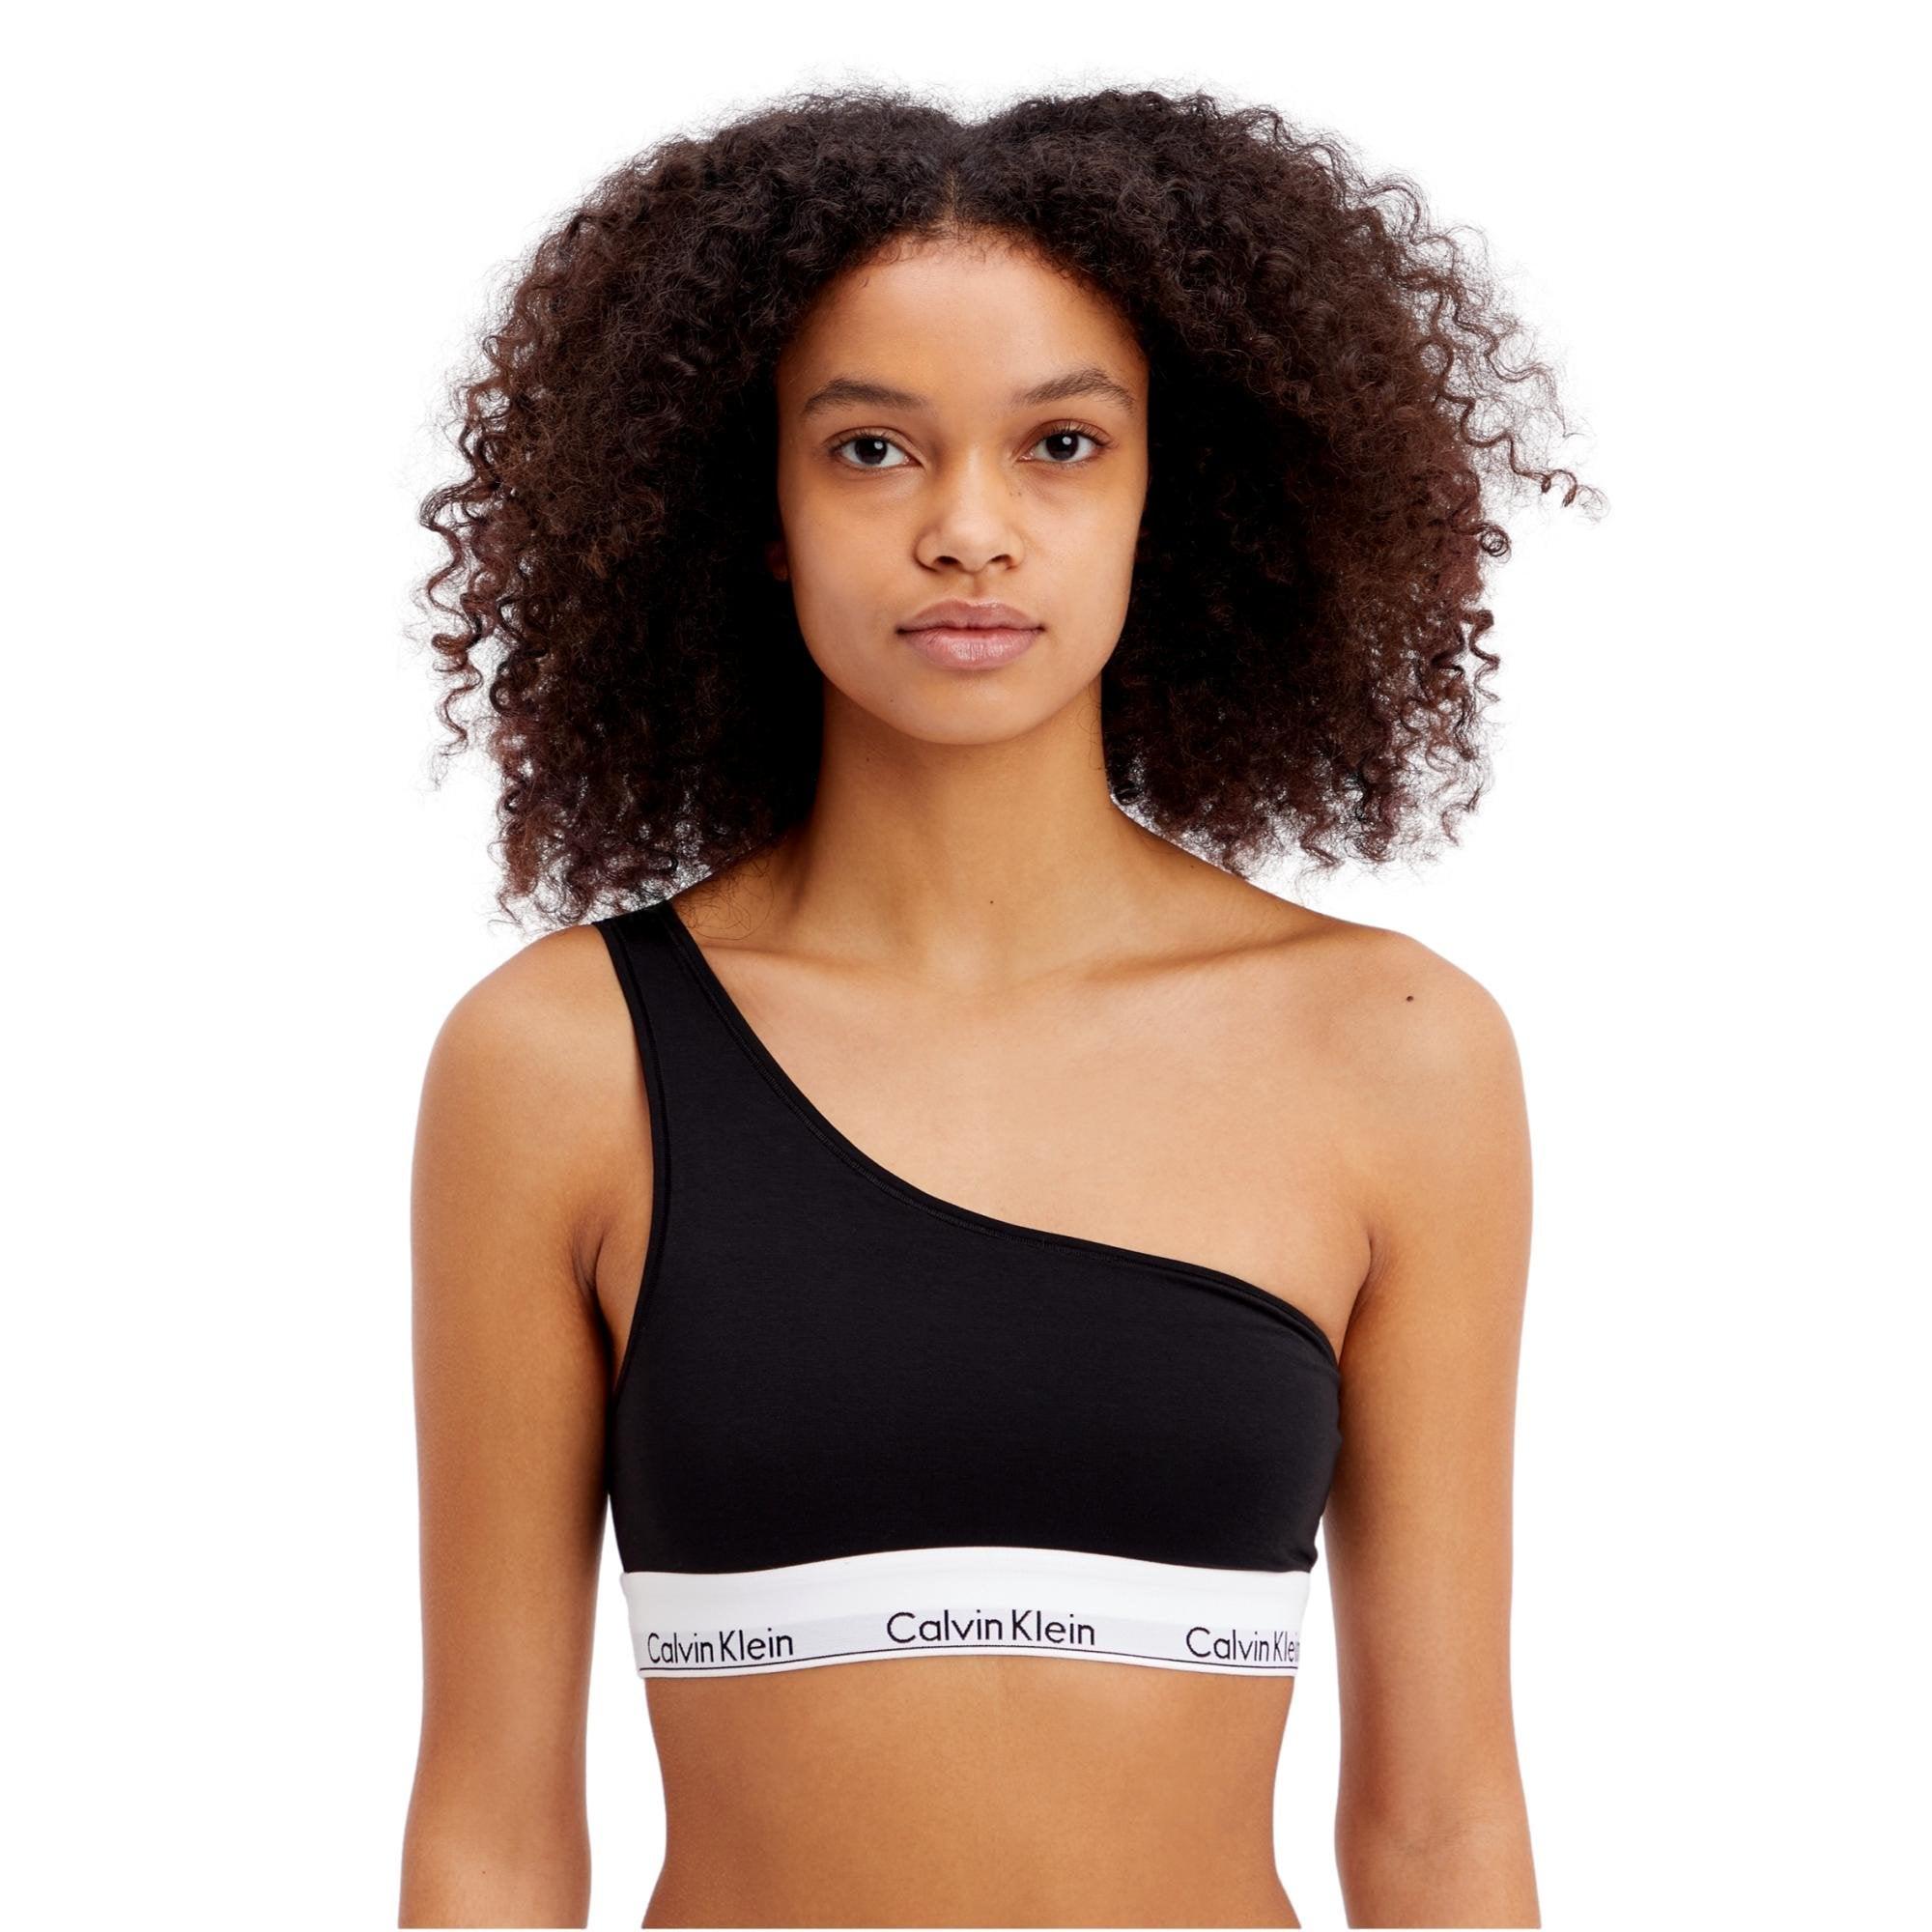 Calvin Klein - Looking for an update? The Modern Cotton One